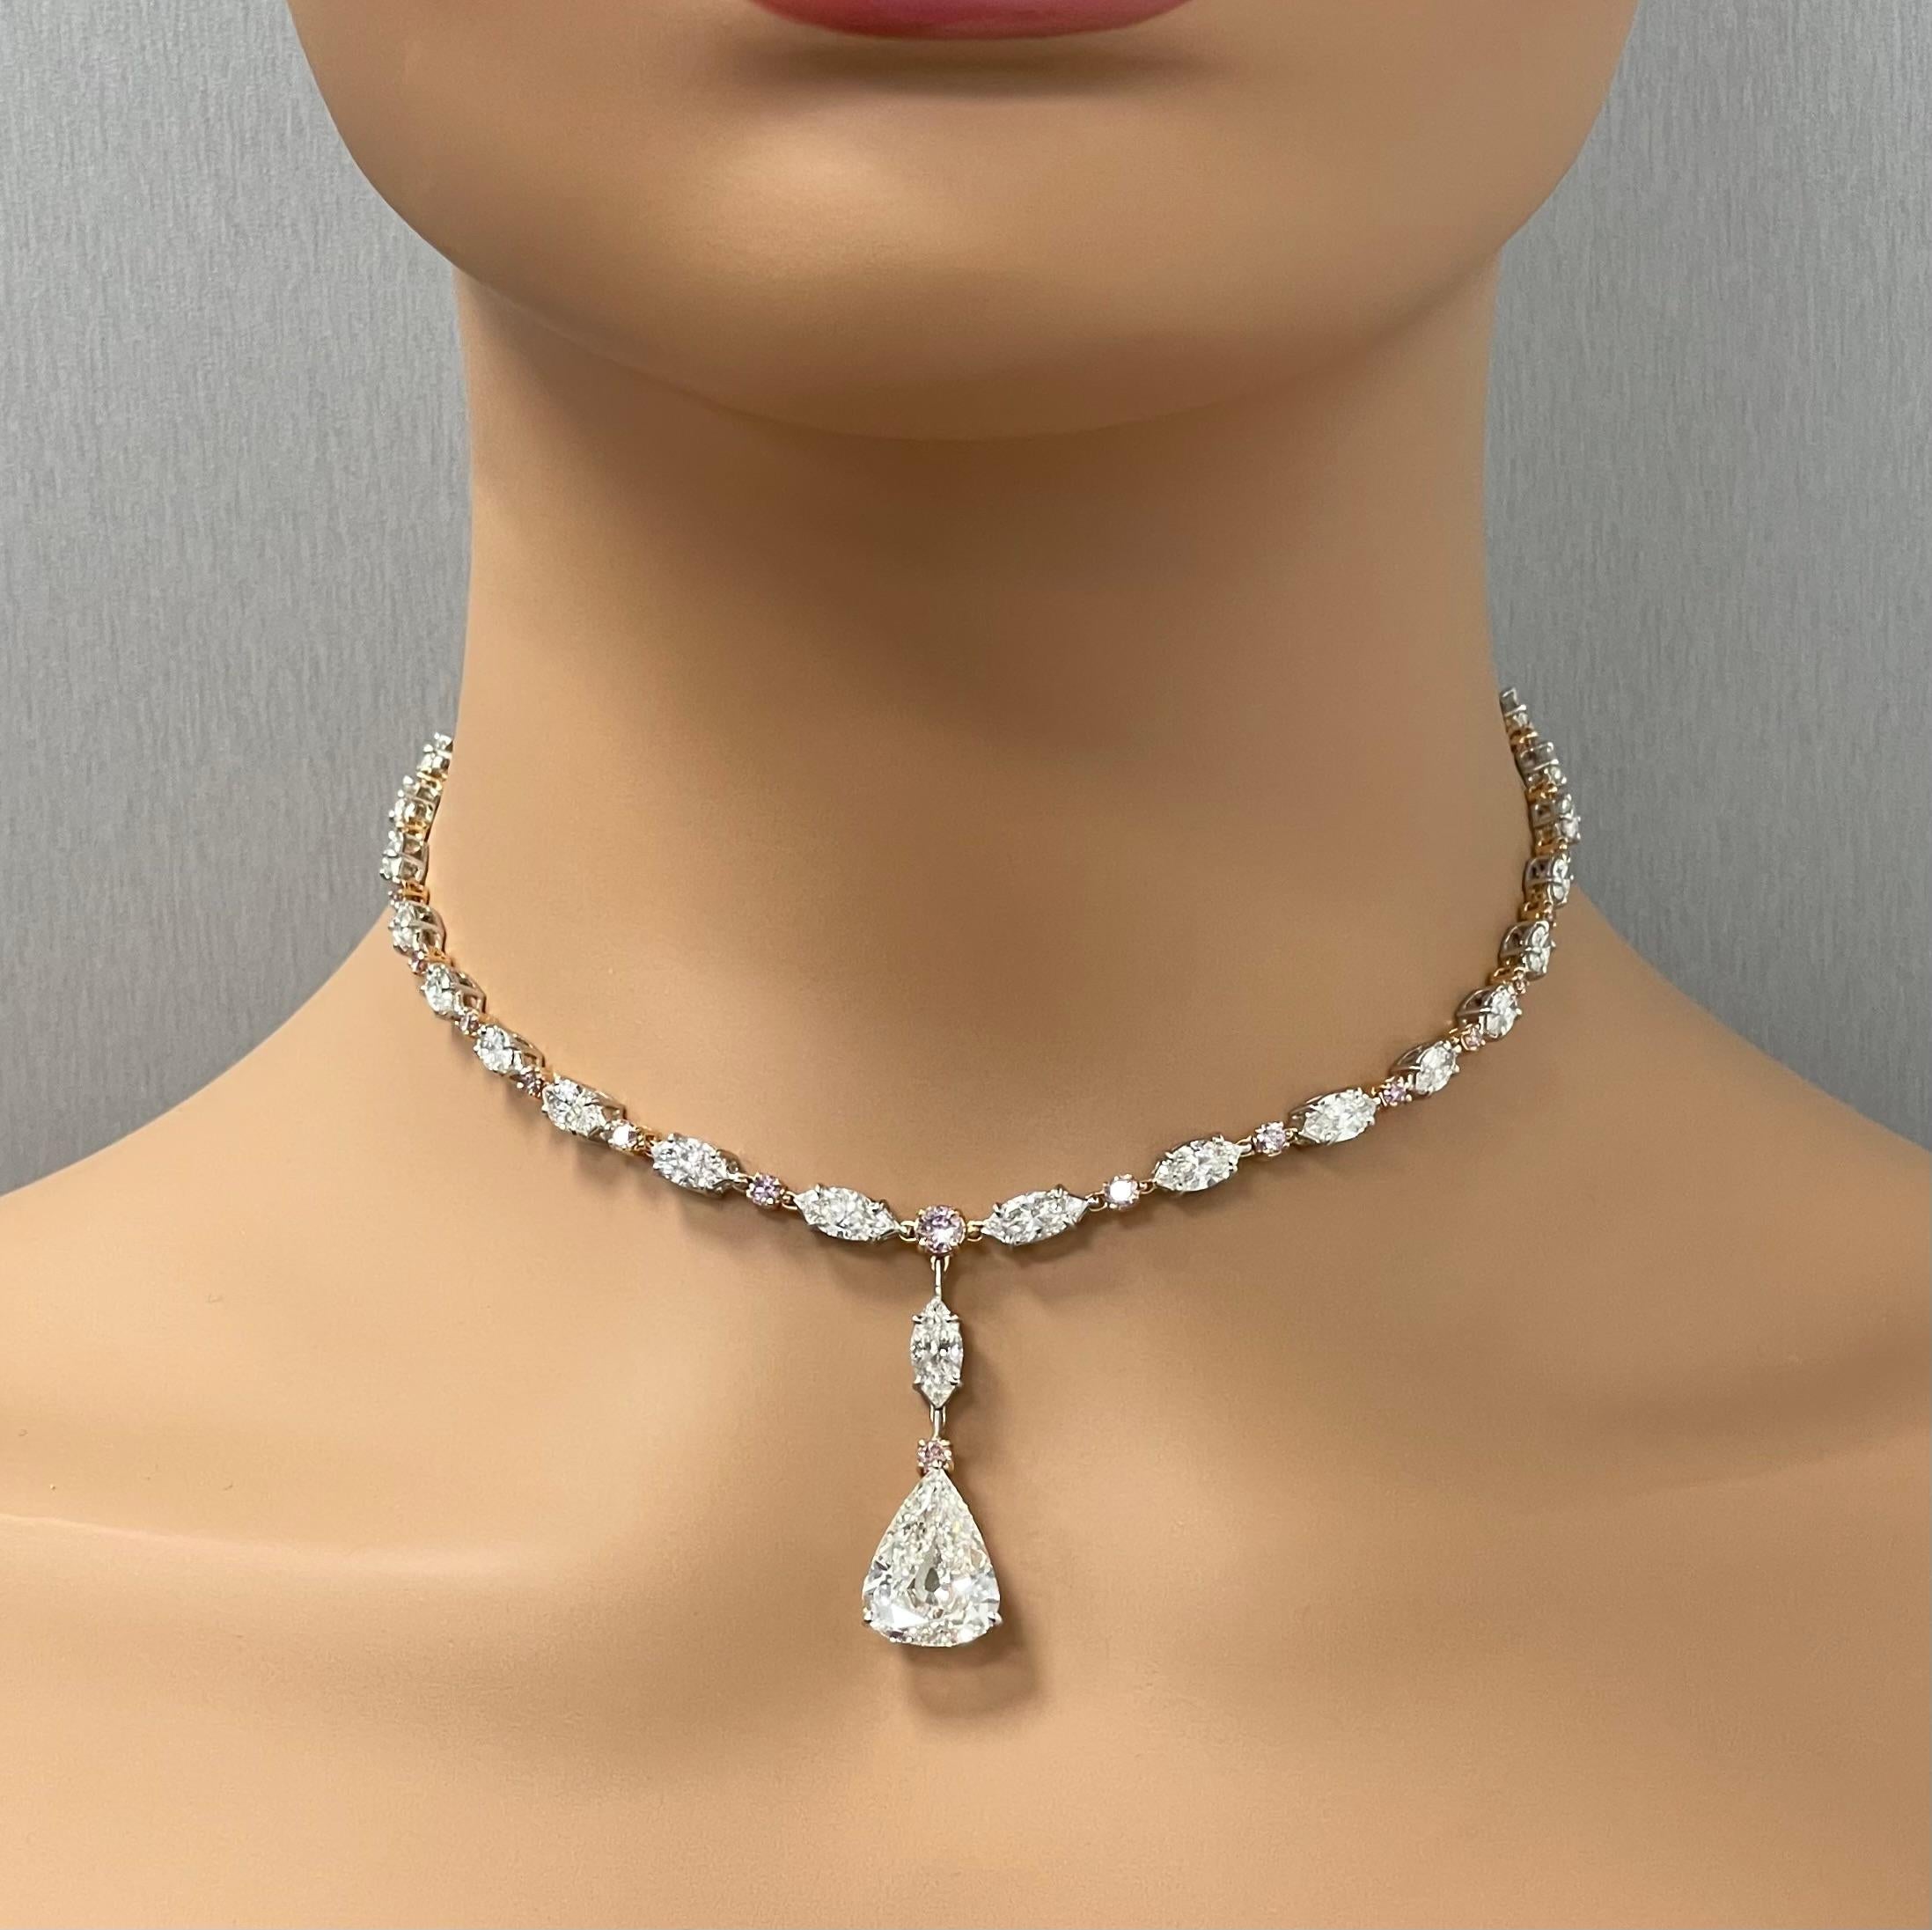 A sensual and dazzling combinations of natural intense pink diamonds with white marquise and pear shapes enables this stunning necklace to create all the drama in its simplicity. The over sized 6.05 ct Pear Shape center takes the neckpiece an extra